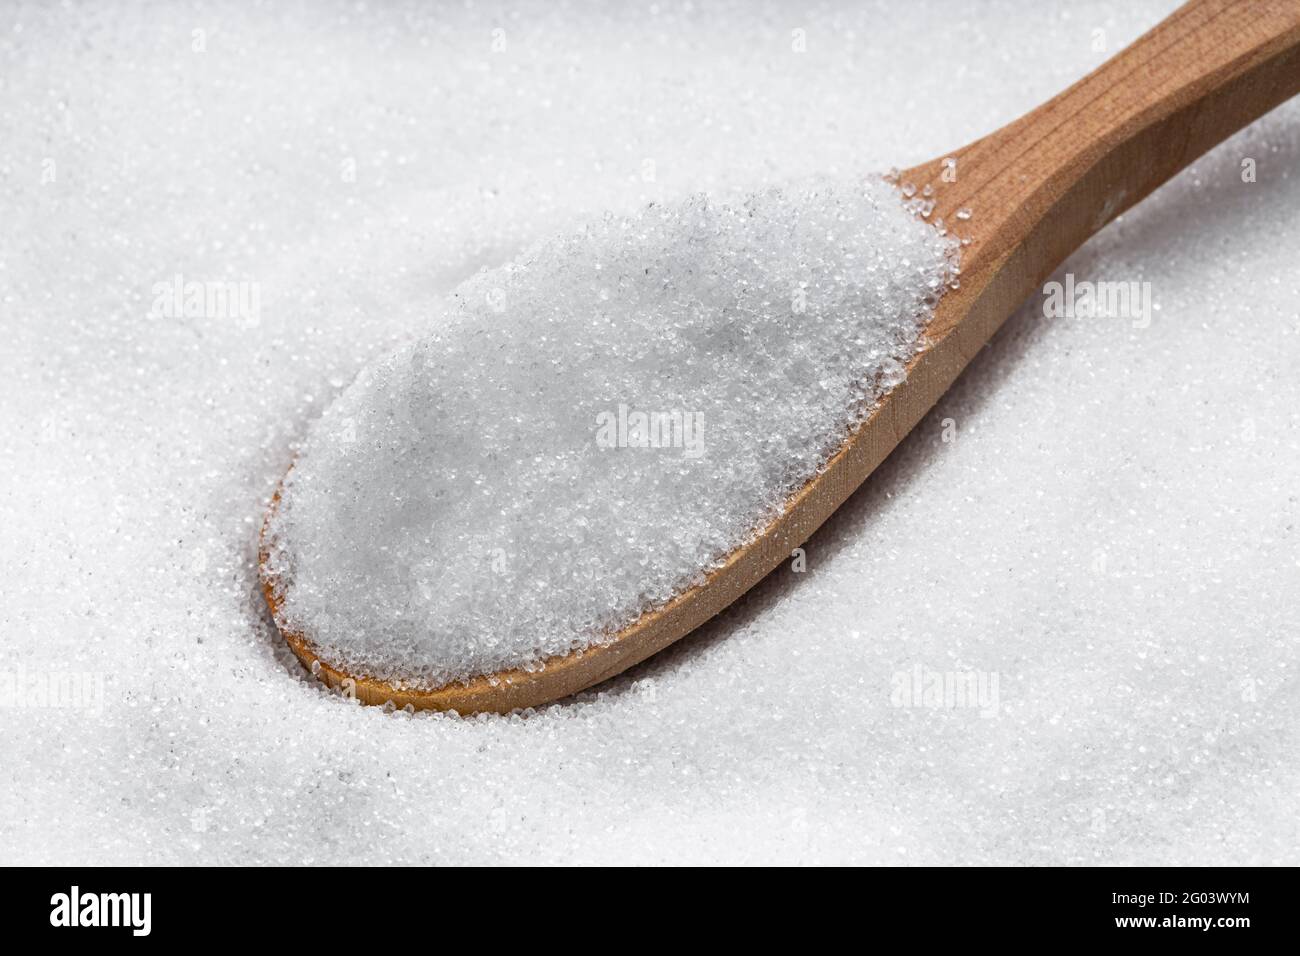 above view of wooden spoon with crystalline erythritol sugar substitute close up on pile of sugar Stock Photo